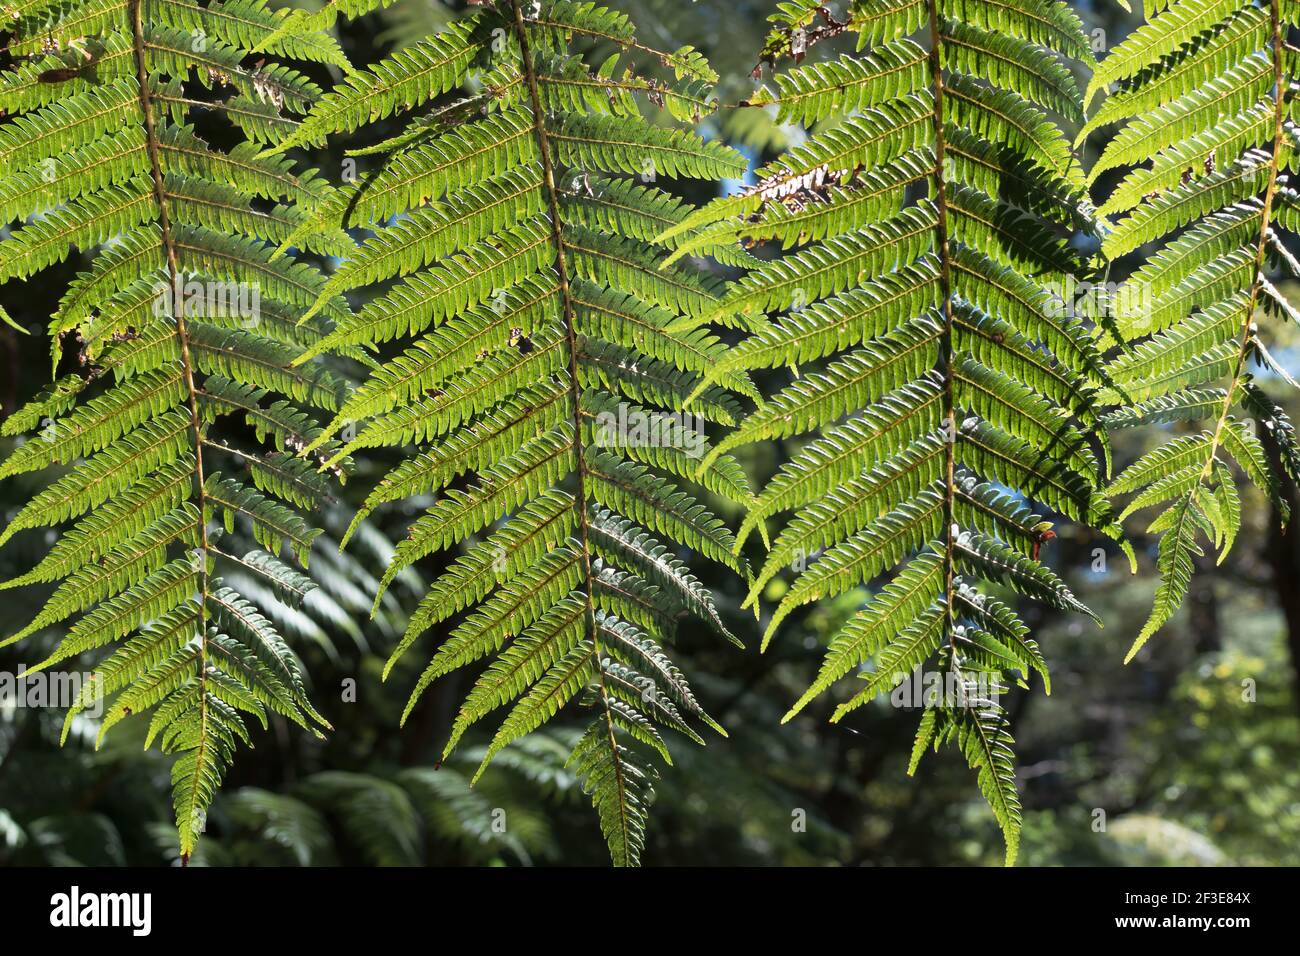 View of silver fern fronds with leaves. New Zealand endemic native plant. Stock Photo